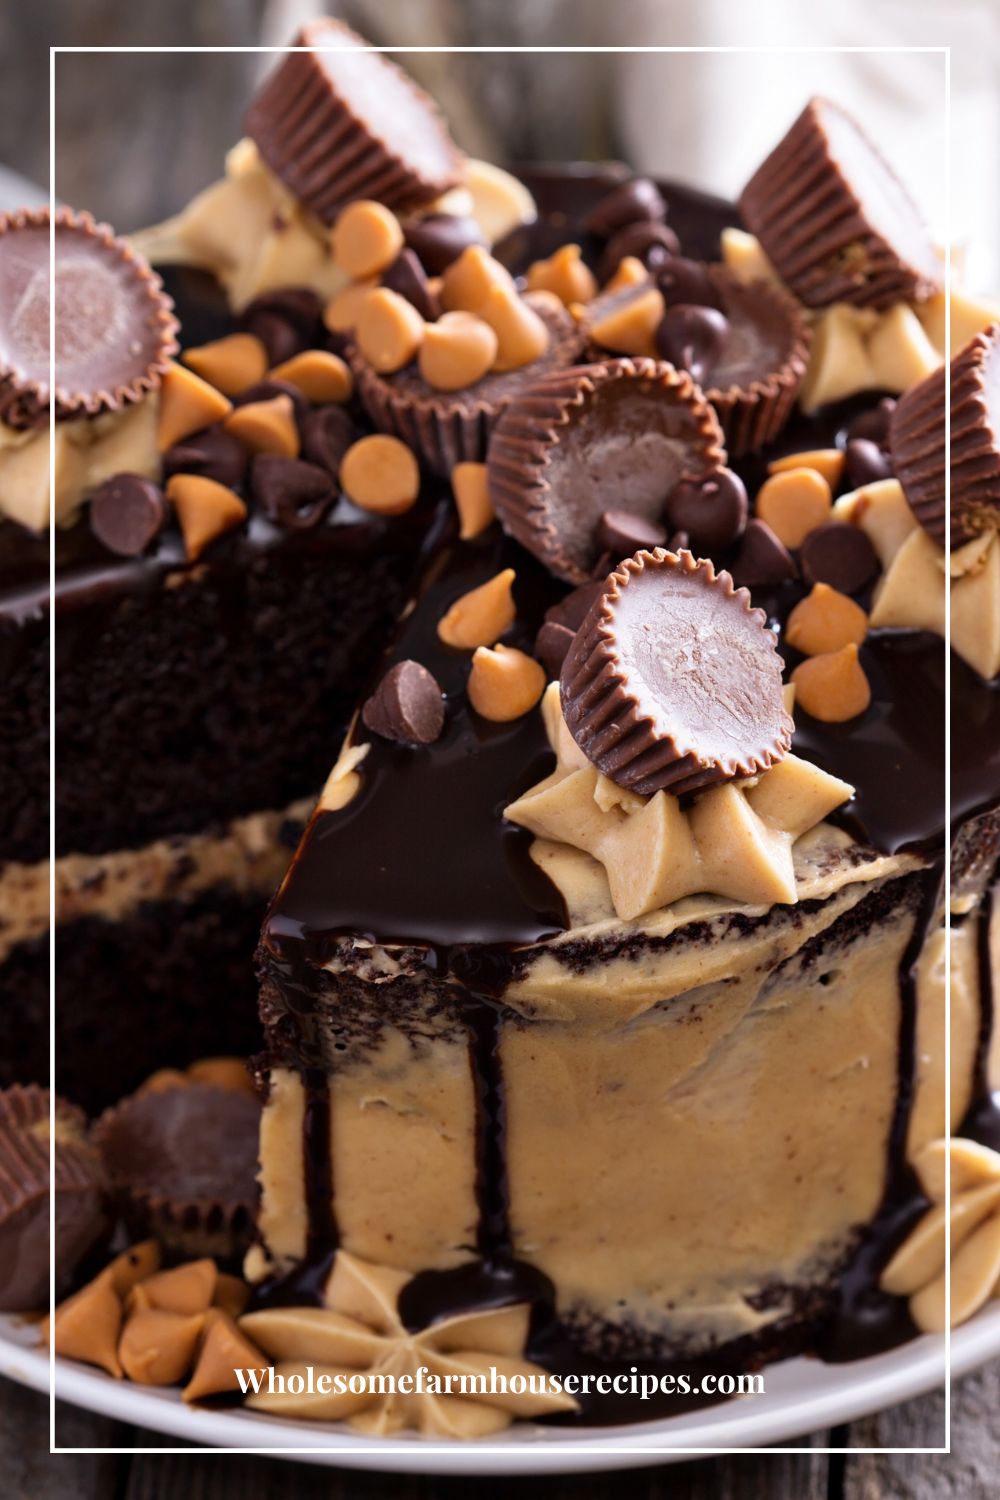 Moist Rich Chocolate Cake with Peanut Butter Frosting and Lots of toppings